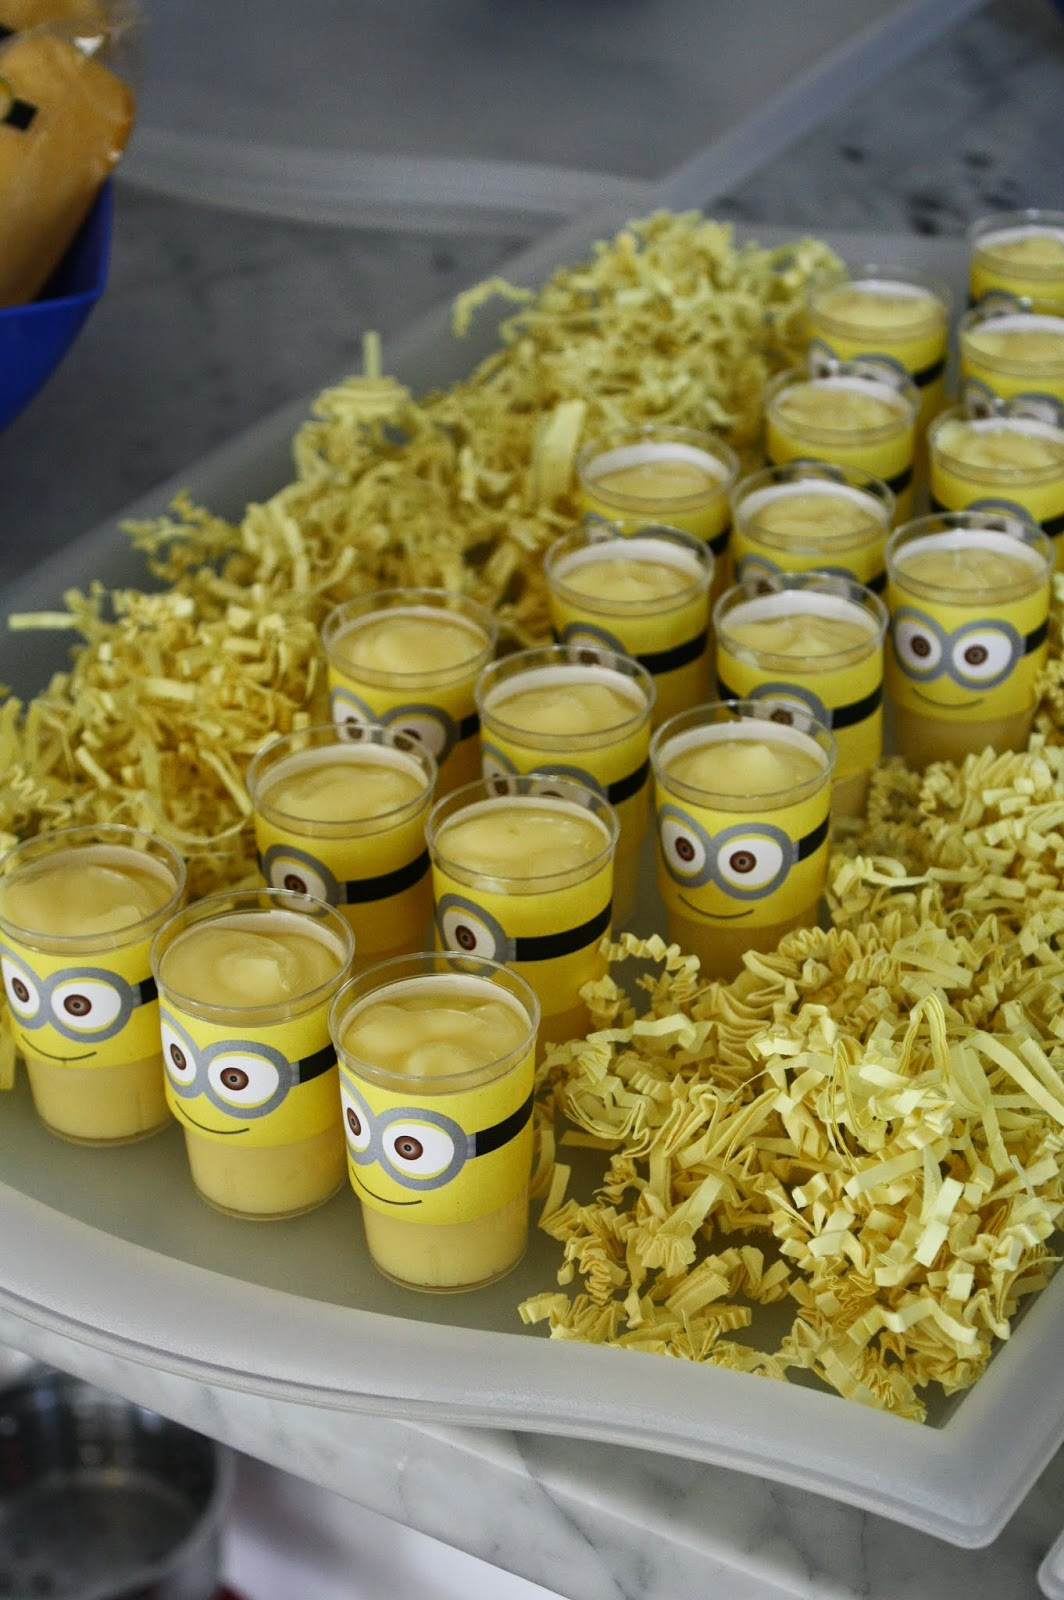 DIY Minion Decorations
 Fun DIY projects for decorating with minions